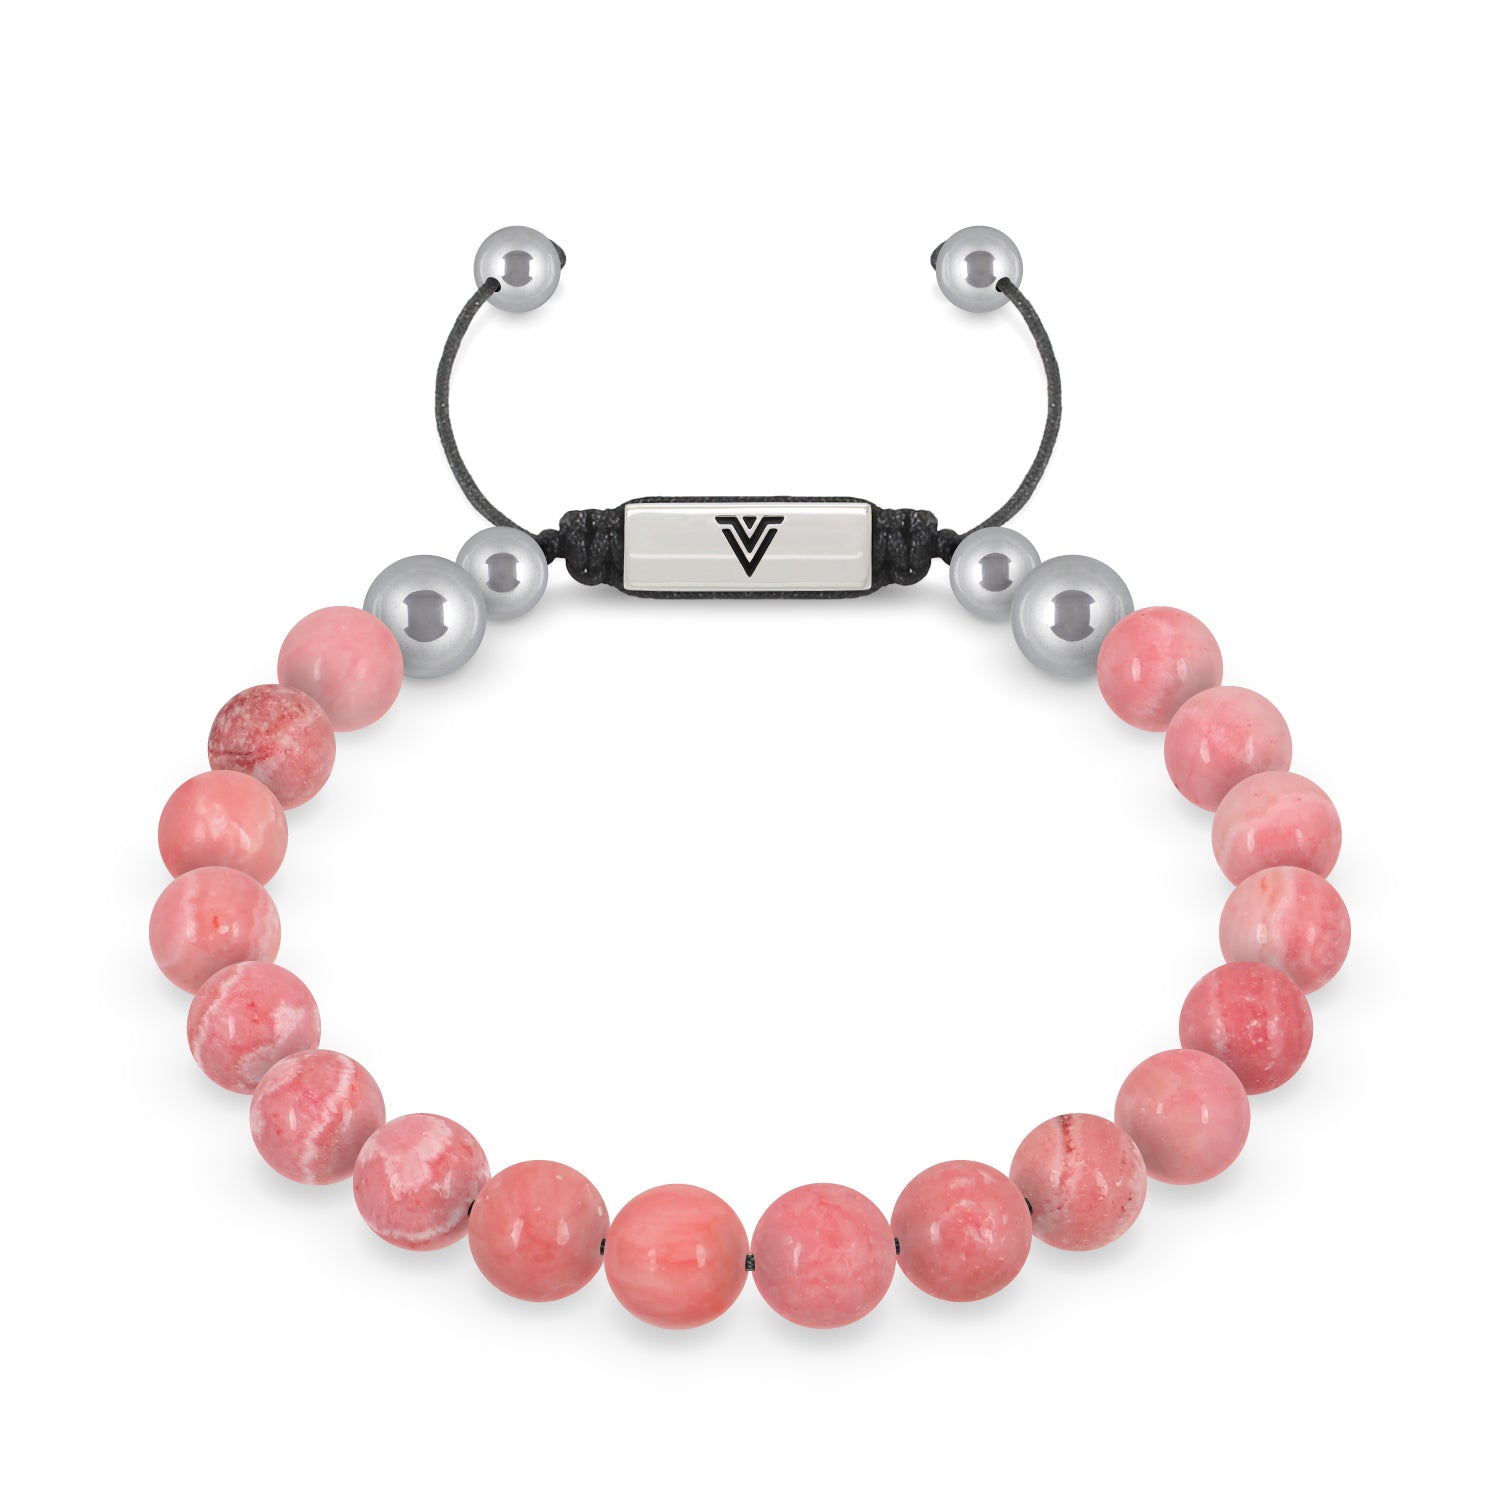 Front view of an 8mm Rhodochrosite beaded shamballa bracelet with silver stainless steel logo bead made by Voltlin